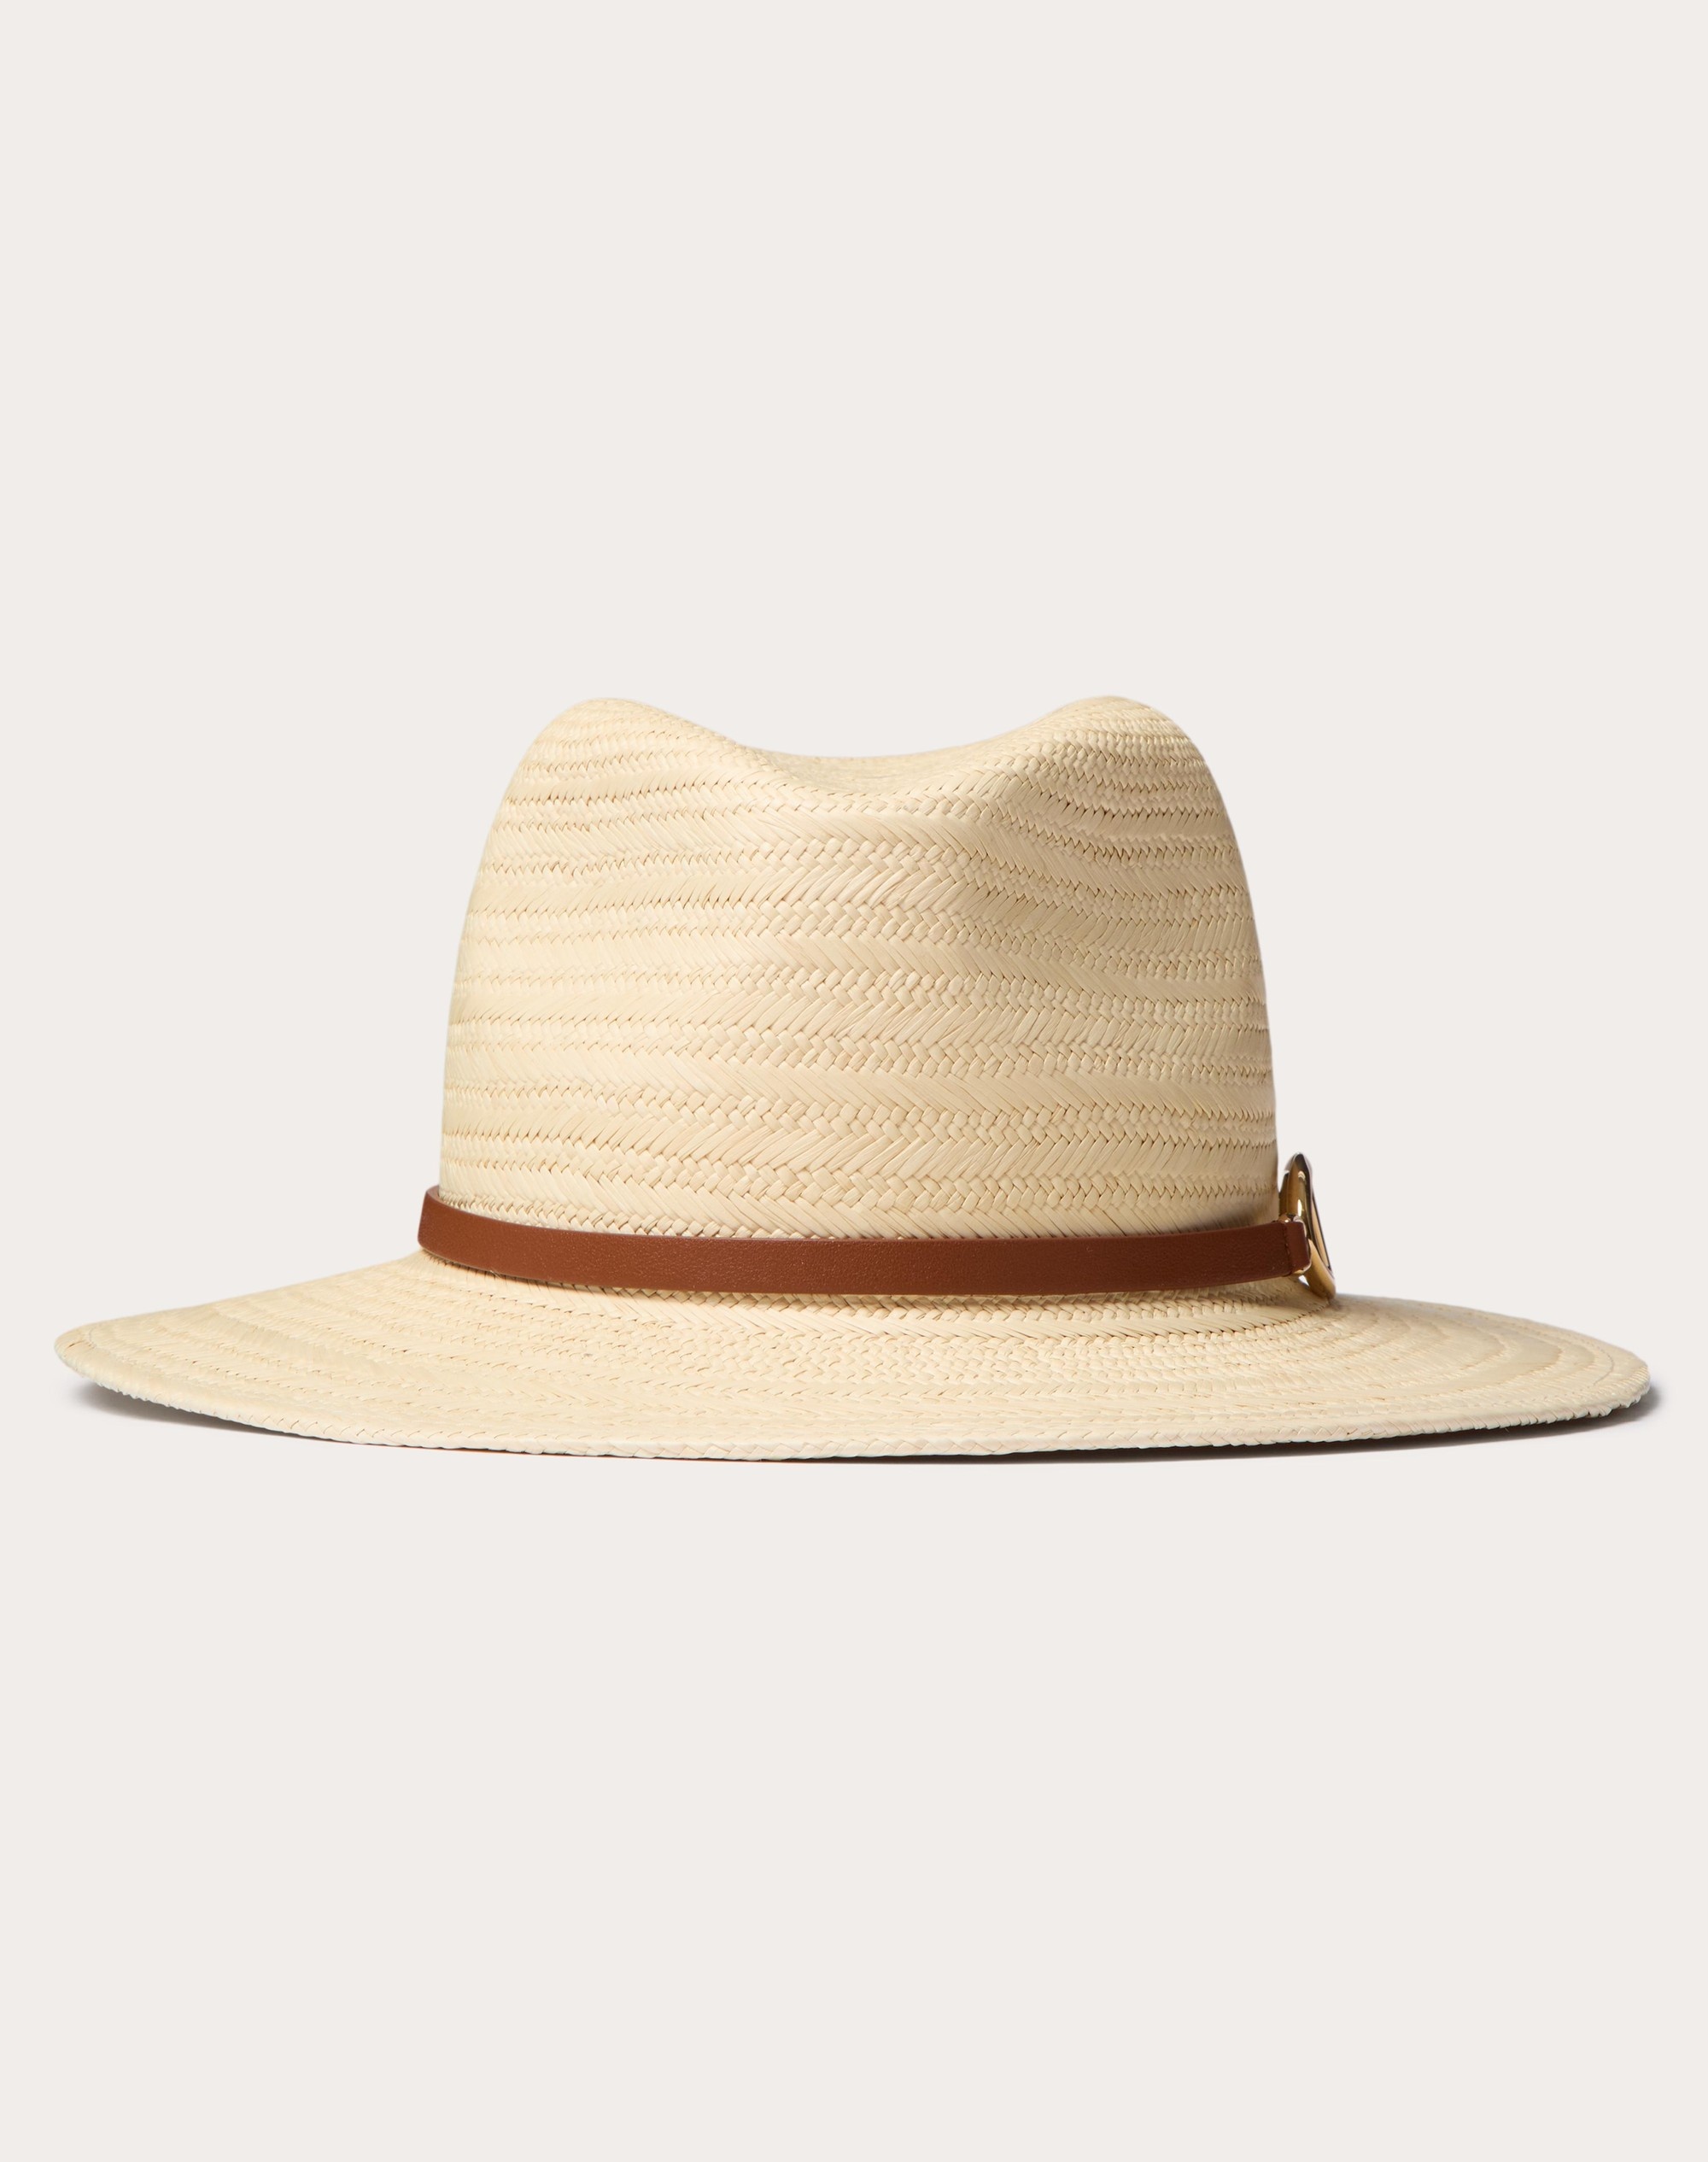 THE BOLD EDITION VLOGO WOVEN PANAMA FEDORA HAT WITH METAL DETAIL - 1